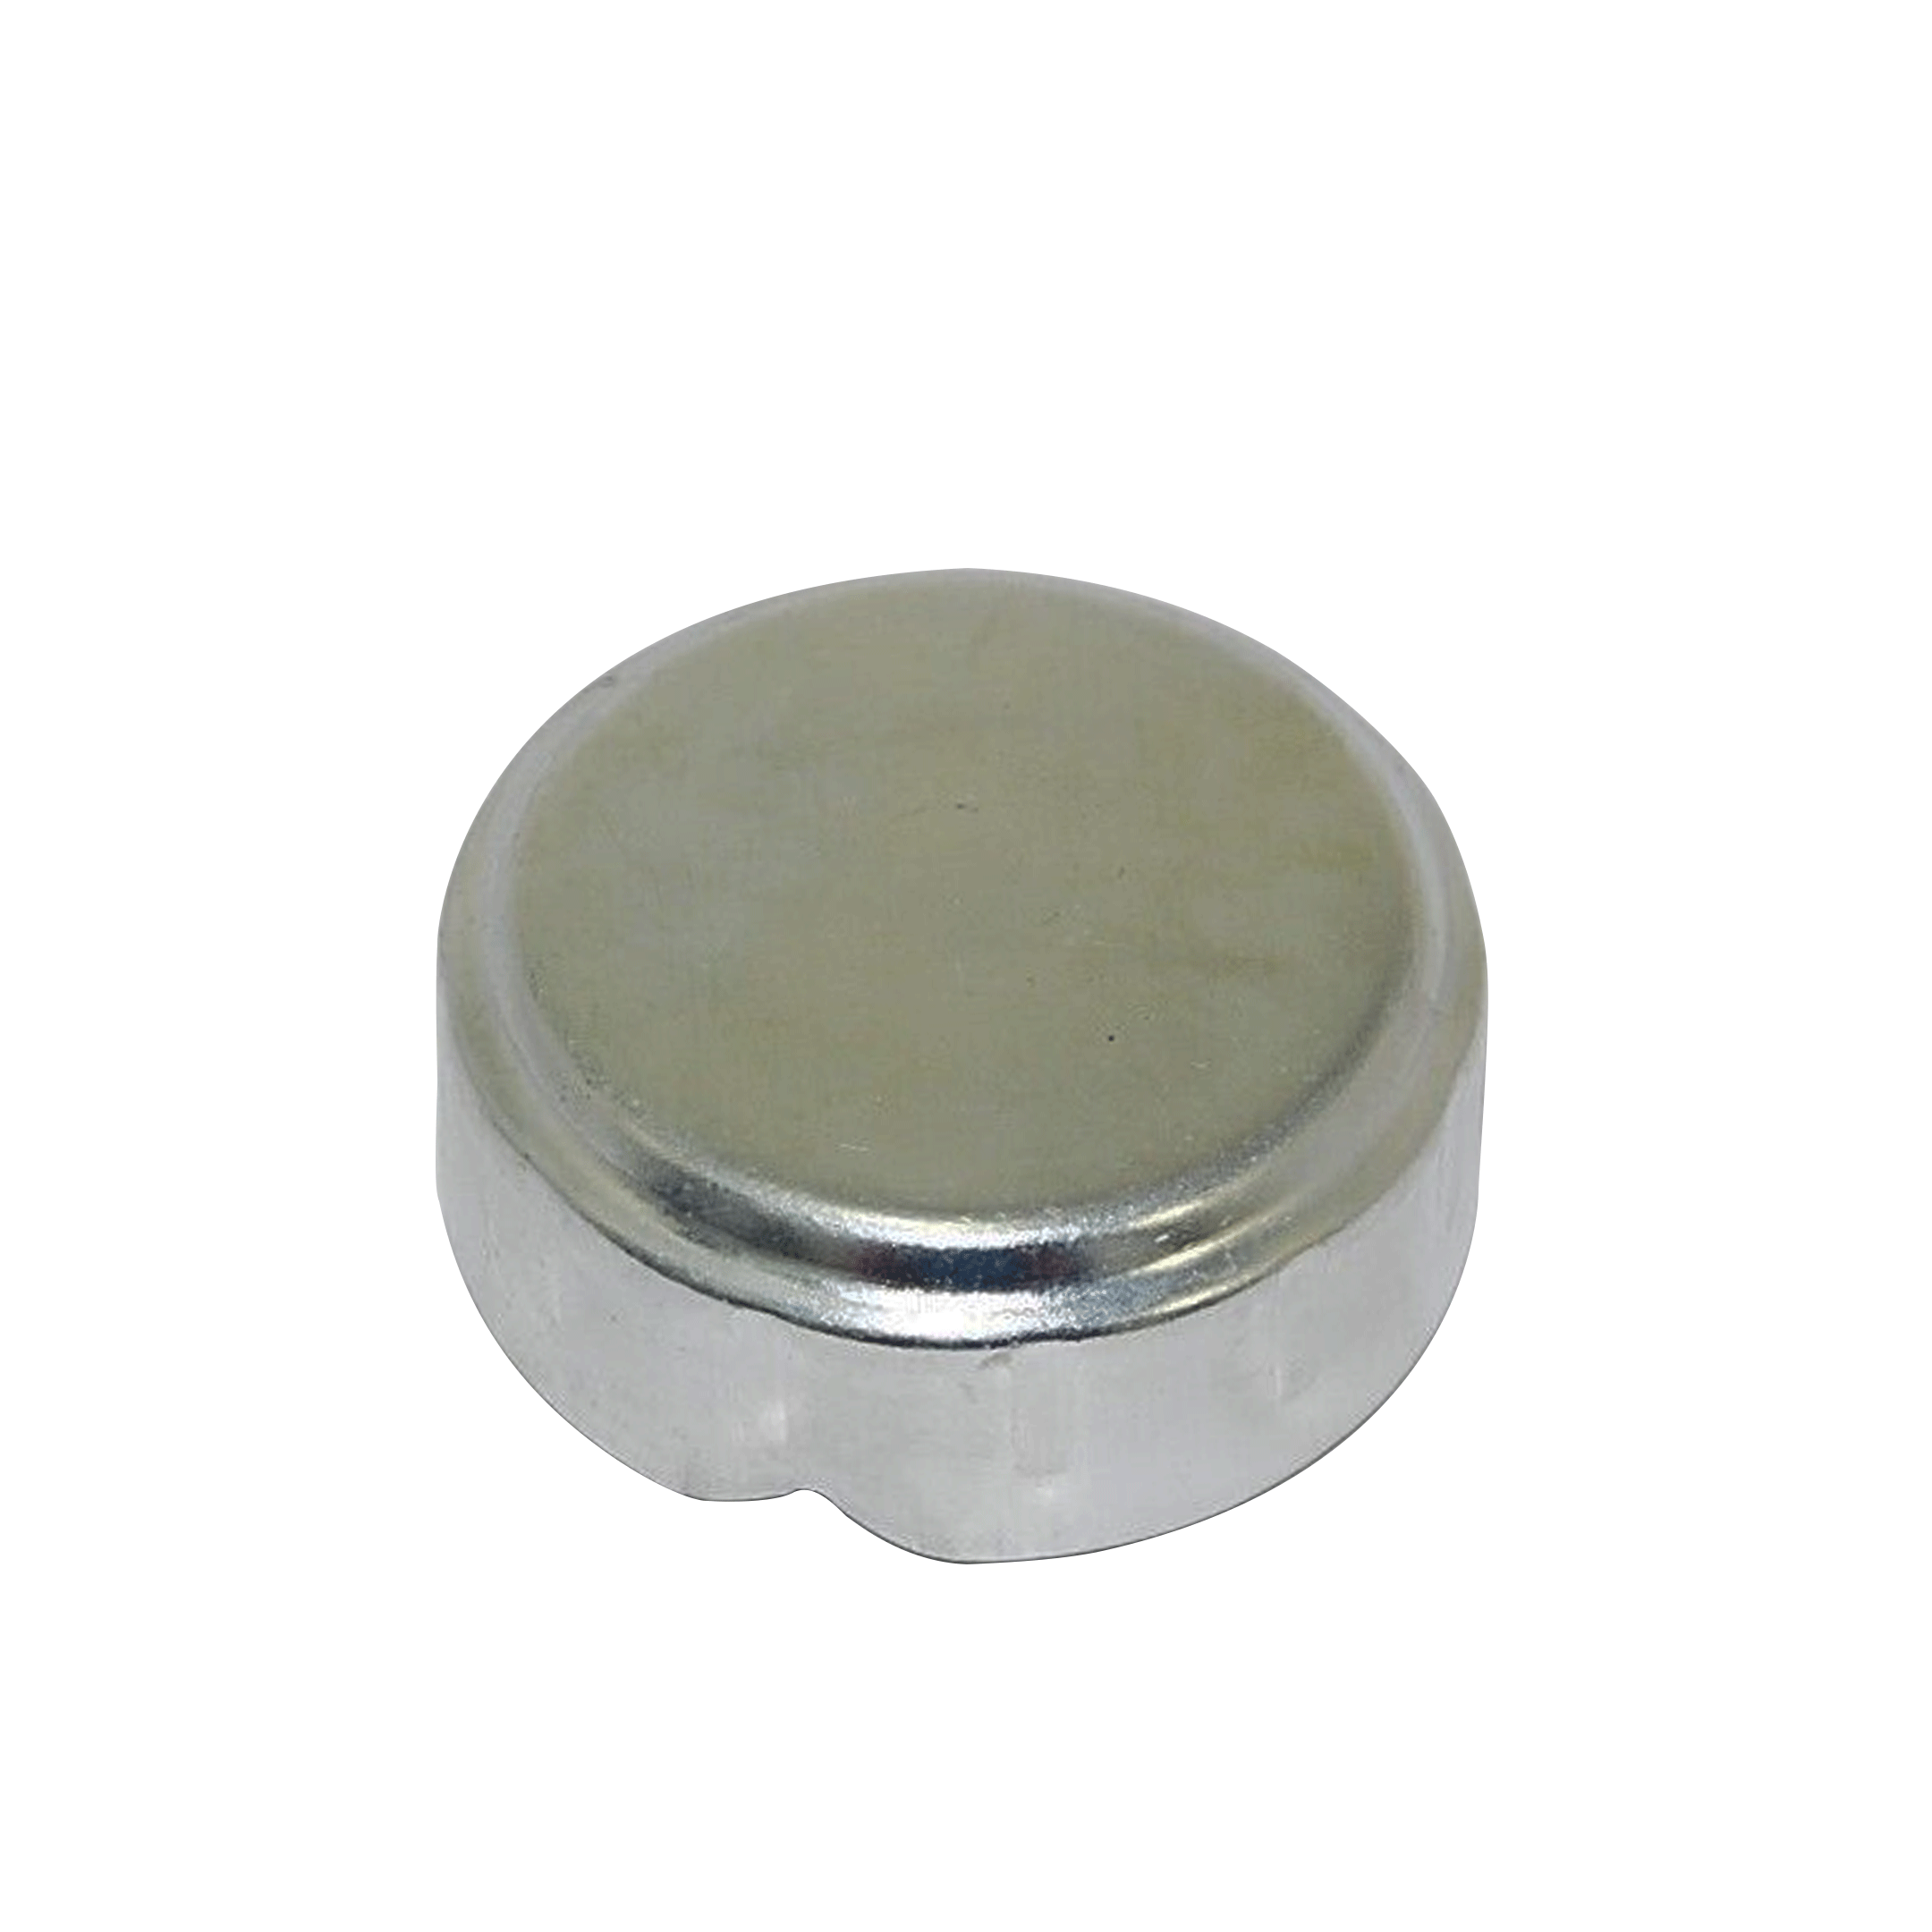 VW Gas Cap - Non-Locking - 70mm -for use with Original Tank only